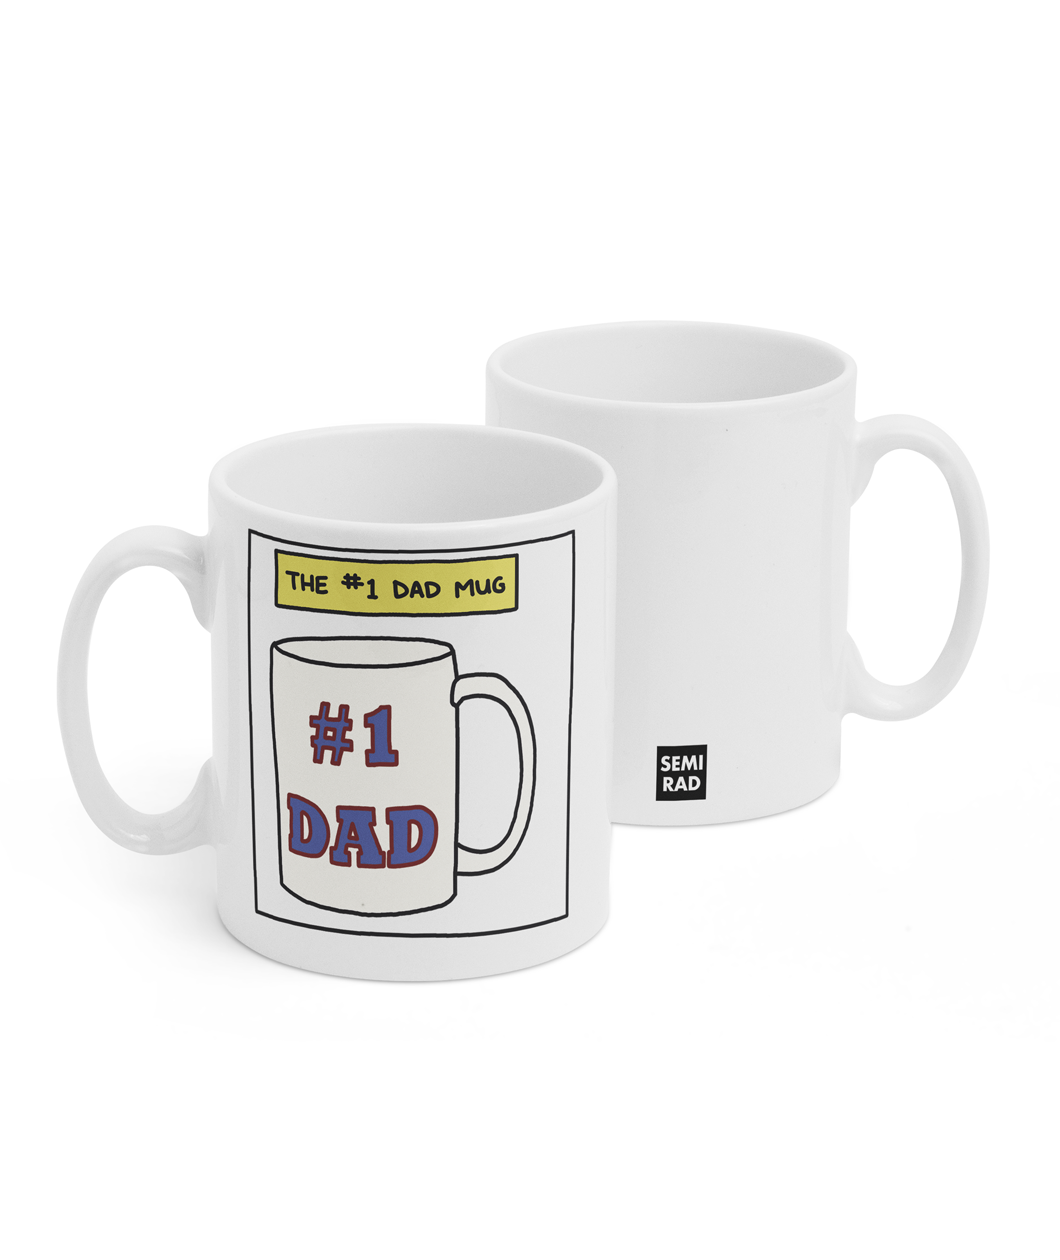 Two white mugs sitting next to each other showing two sides of the same mug. The front side has a drawing of a mug with "#1 Dad" written on it with a label above that says "The #1 dad mug". On the back of the mug is a small black square with the words "Semi Rad".